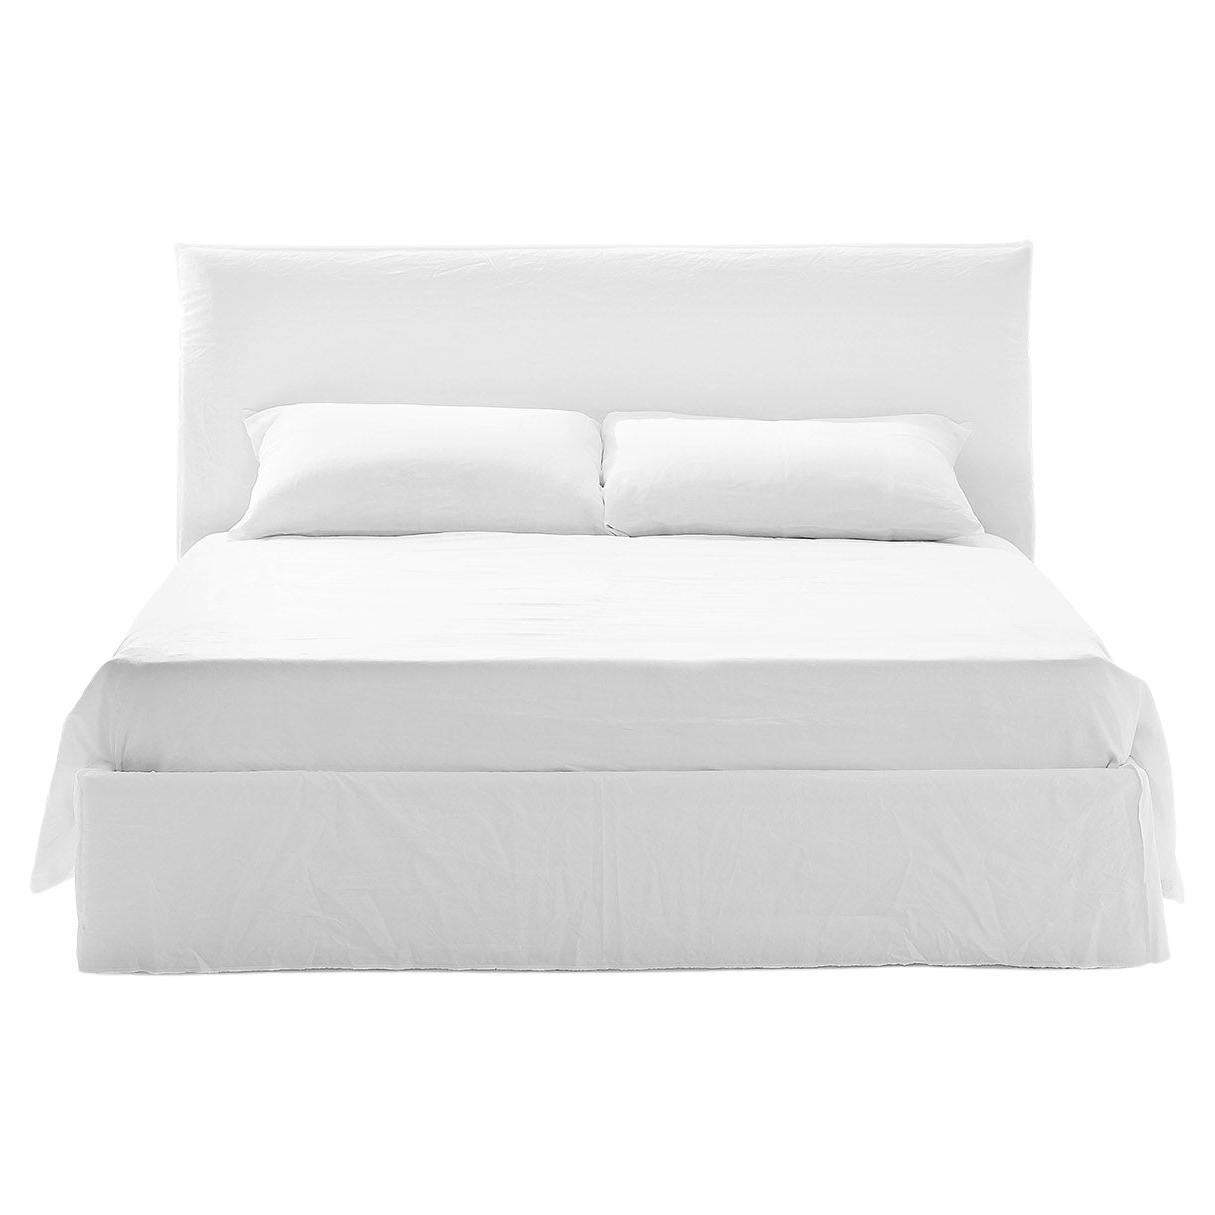 Gervasoni Ghost 80 Queen Knock Down Bed in White Linen Upholstery, Paola Navone For Sale